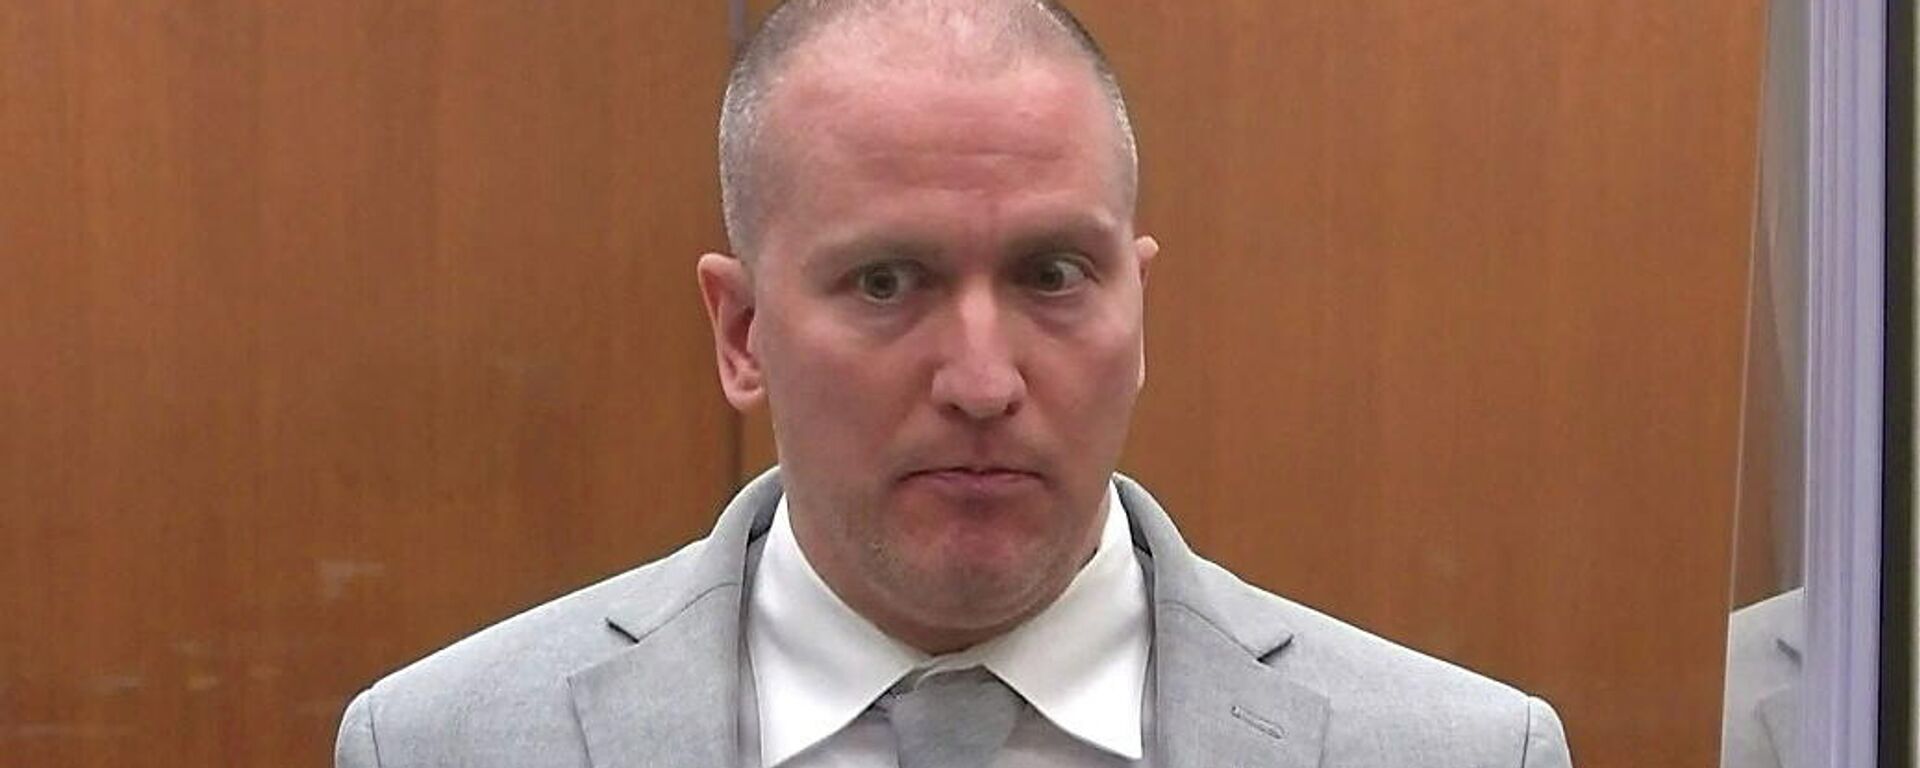 Former Minneapolis police officer Derek Chauvin addresses his sentencing hearing and the judge as he awaits his sentence after being convicted of murder in the death of George Floyd in Minneapolis, Minnesota, U.S. June 25, 2021 in a still image from video. - Sputnik International, 1920, 15.12.2021